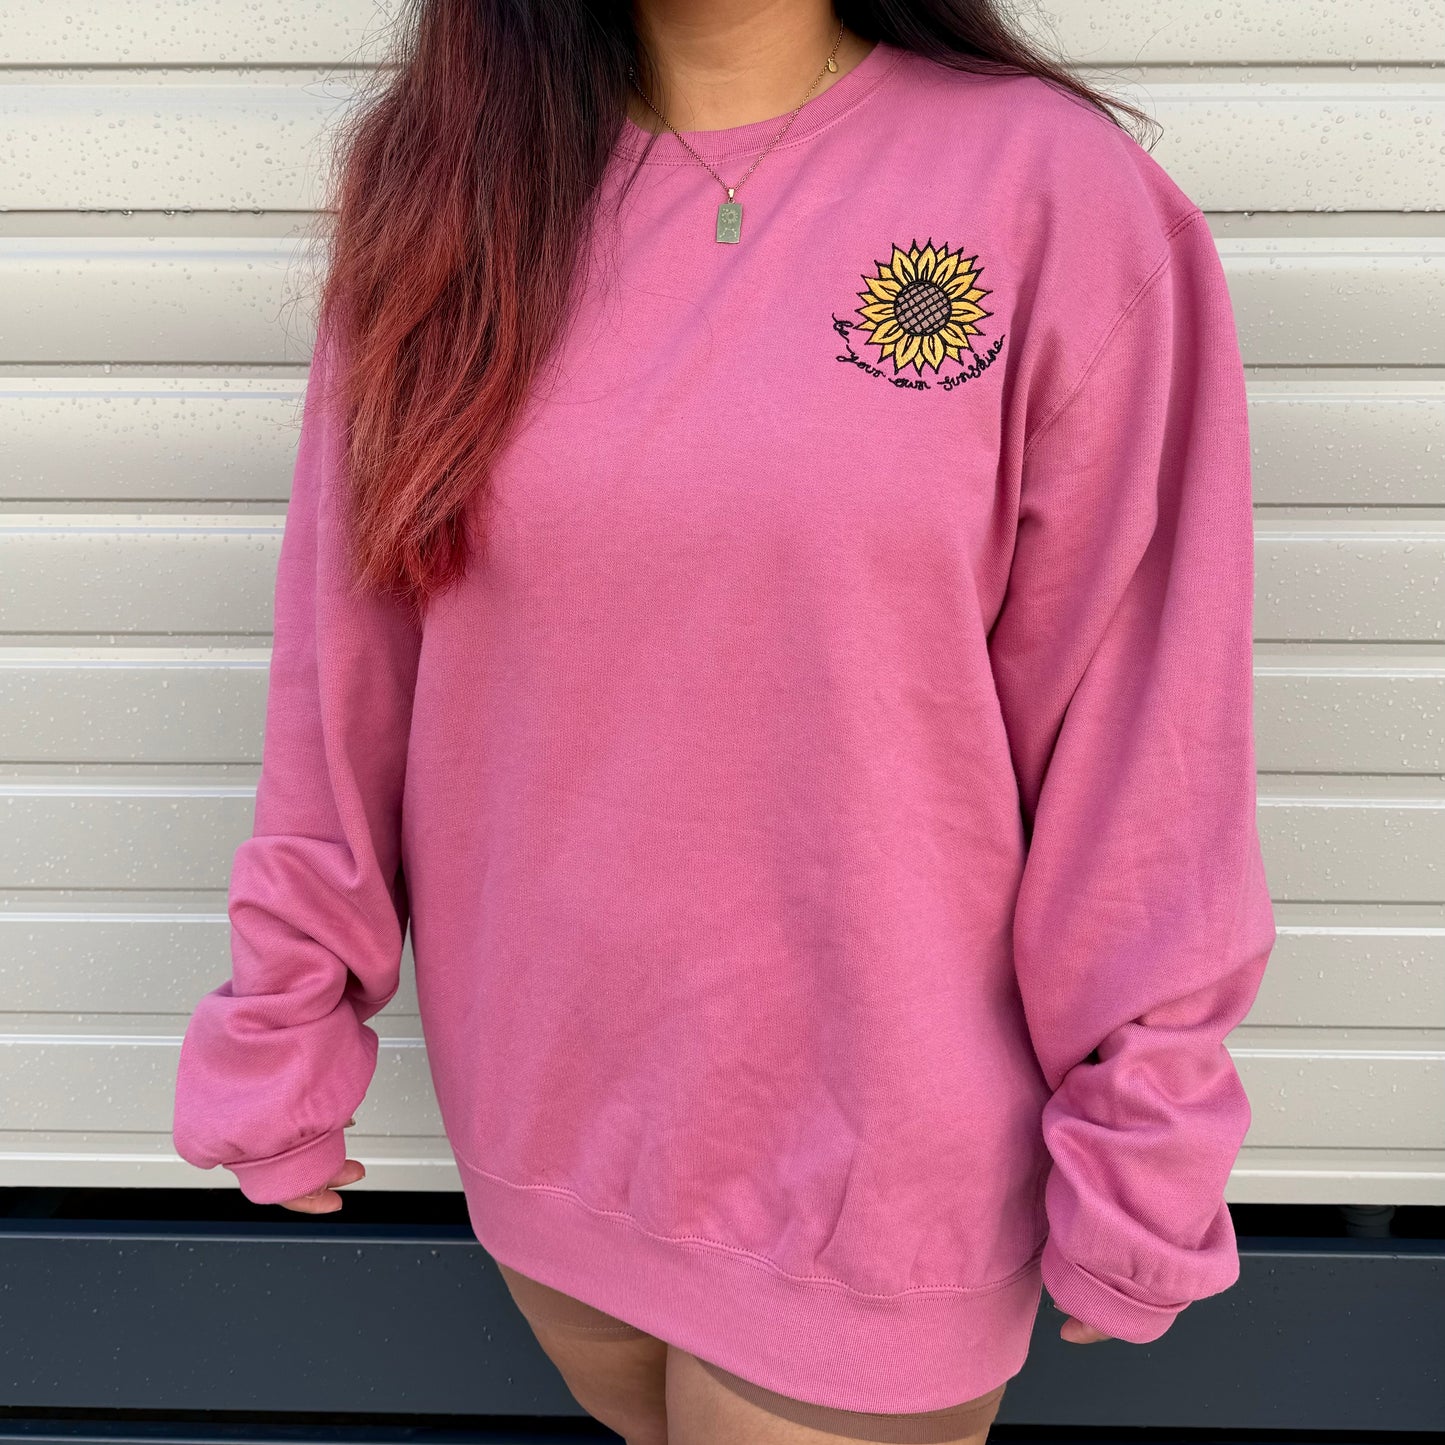 be your own sunshine embroidered sweatshirt - deep pink